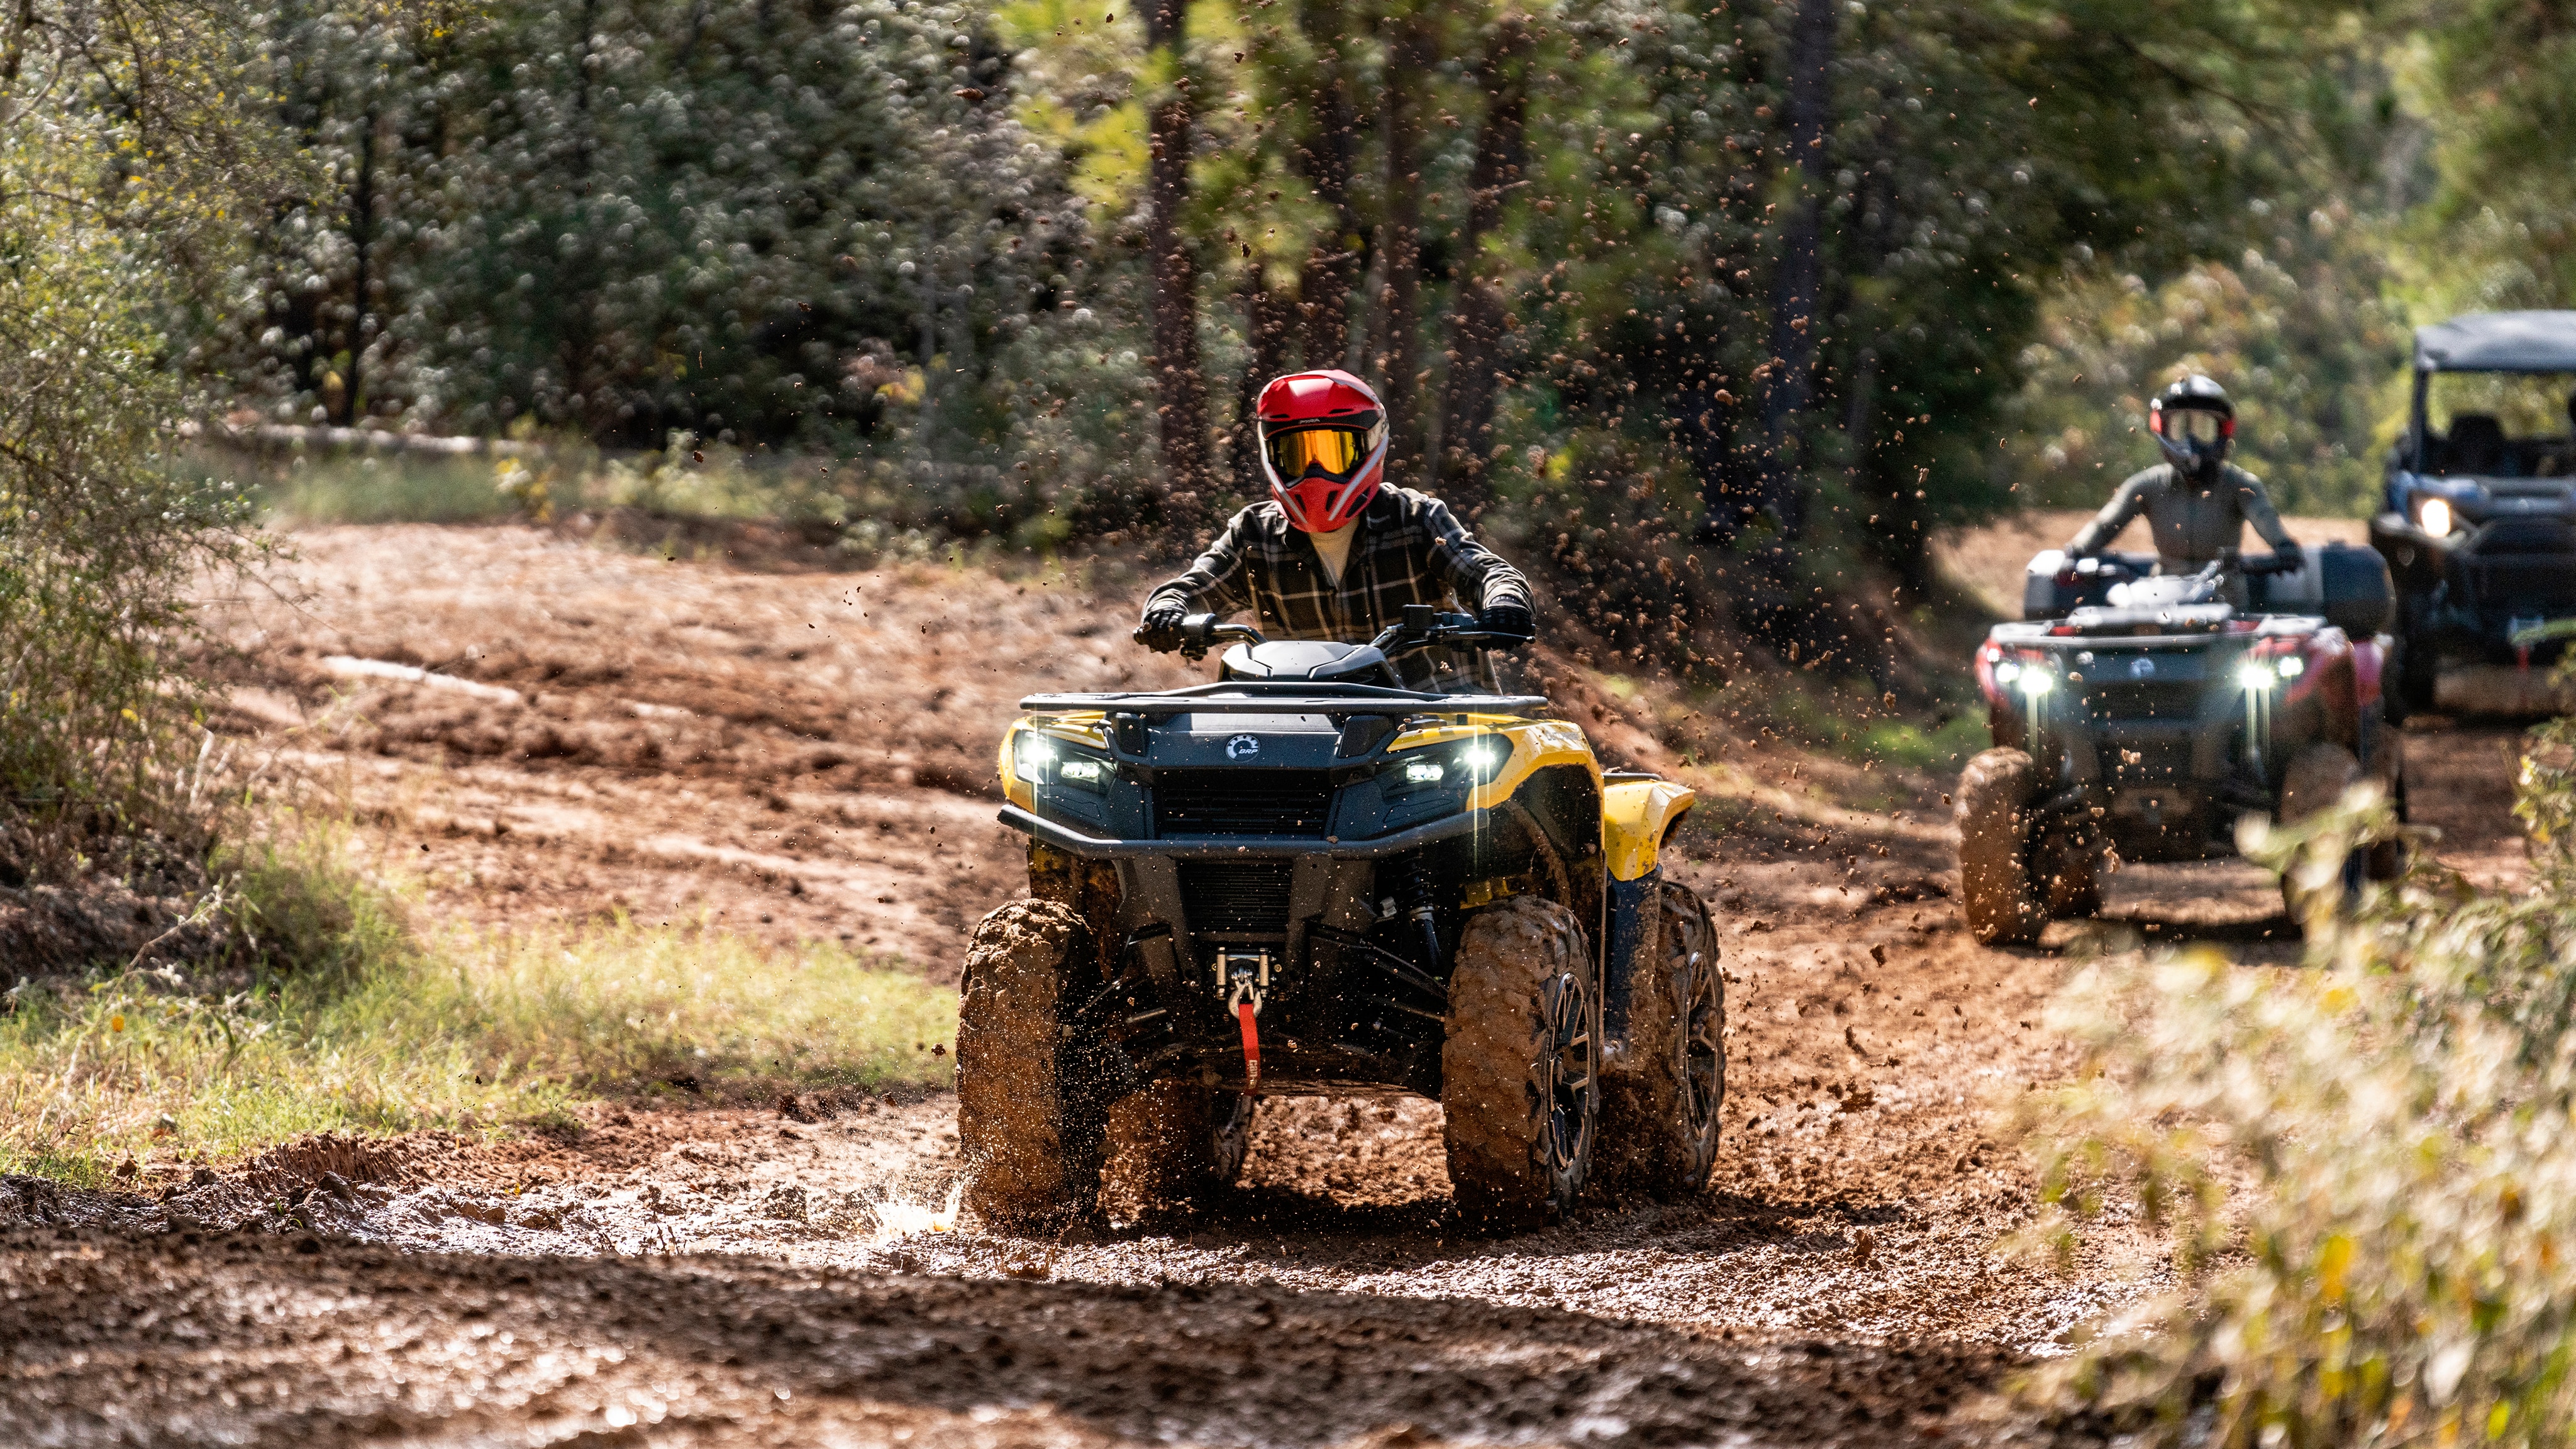 Three Outlander 500/700 ATVs following one another on a muddy trail